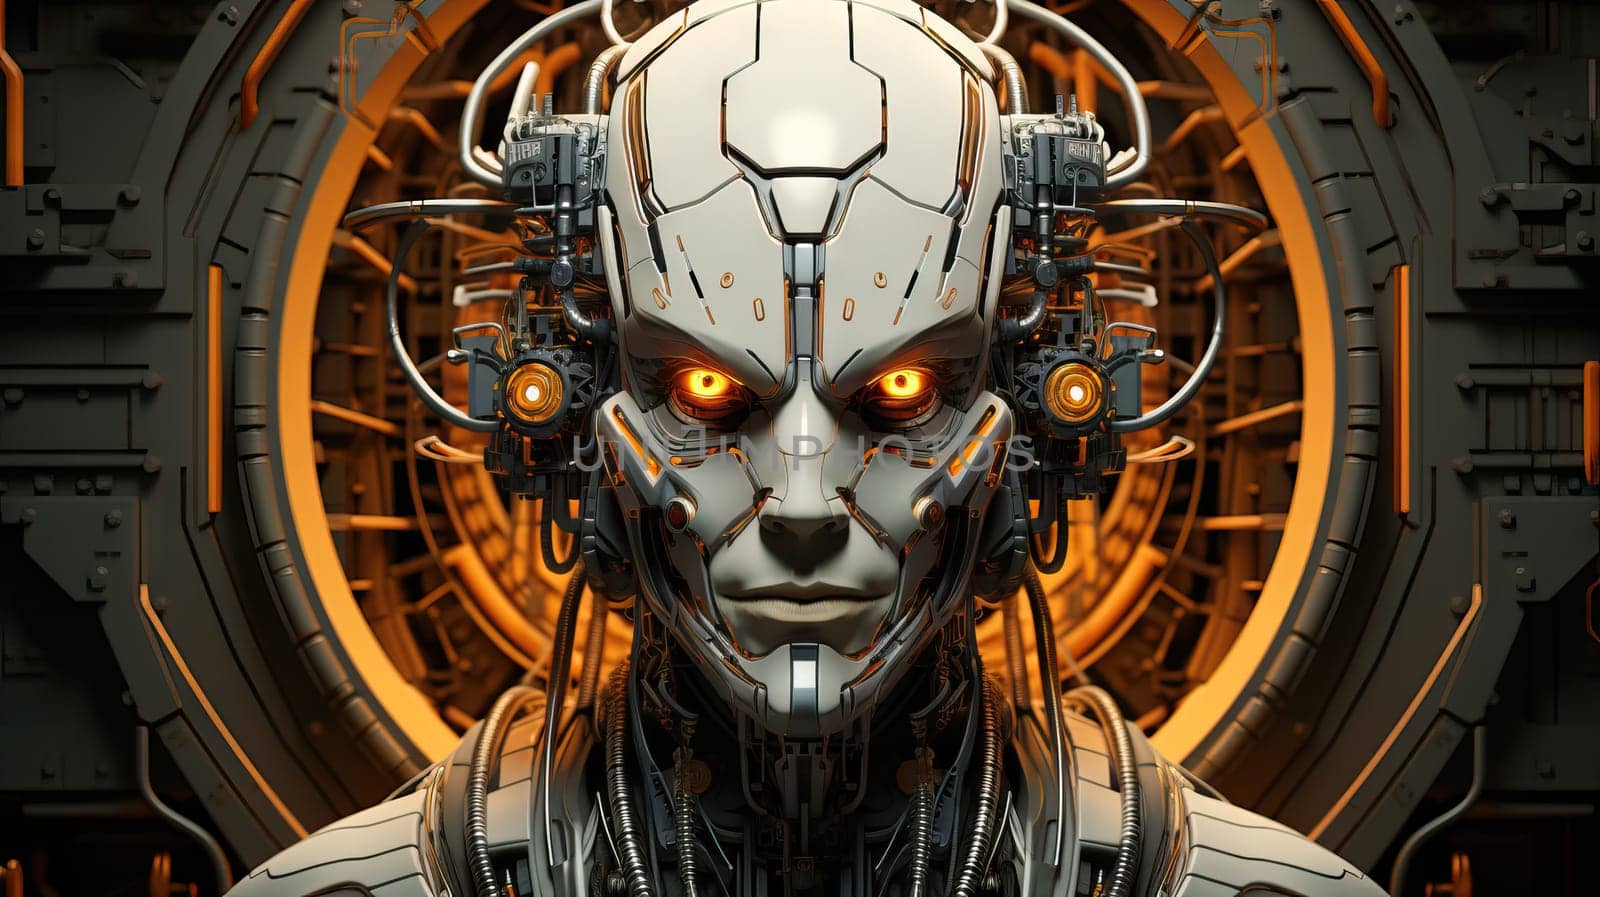 Concept of artificial brain of robot composed of gears and chips. Futuristic concept of neurology. A science fiction illustration of the future of robotics and artificial intelligence.